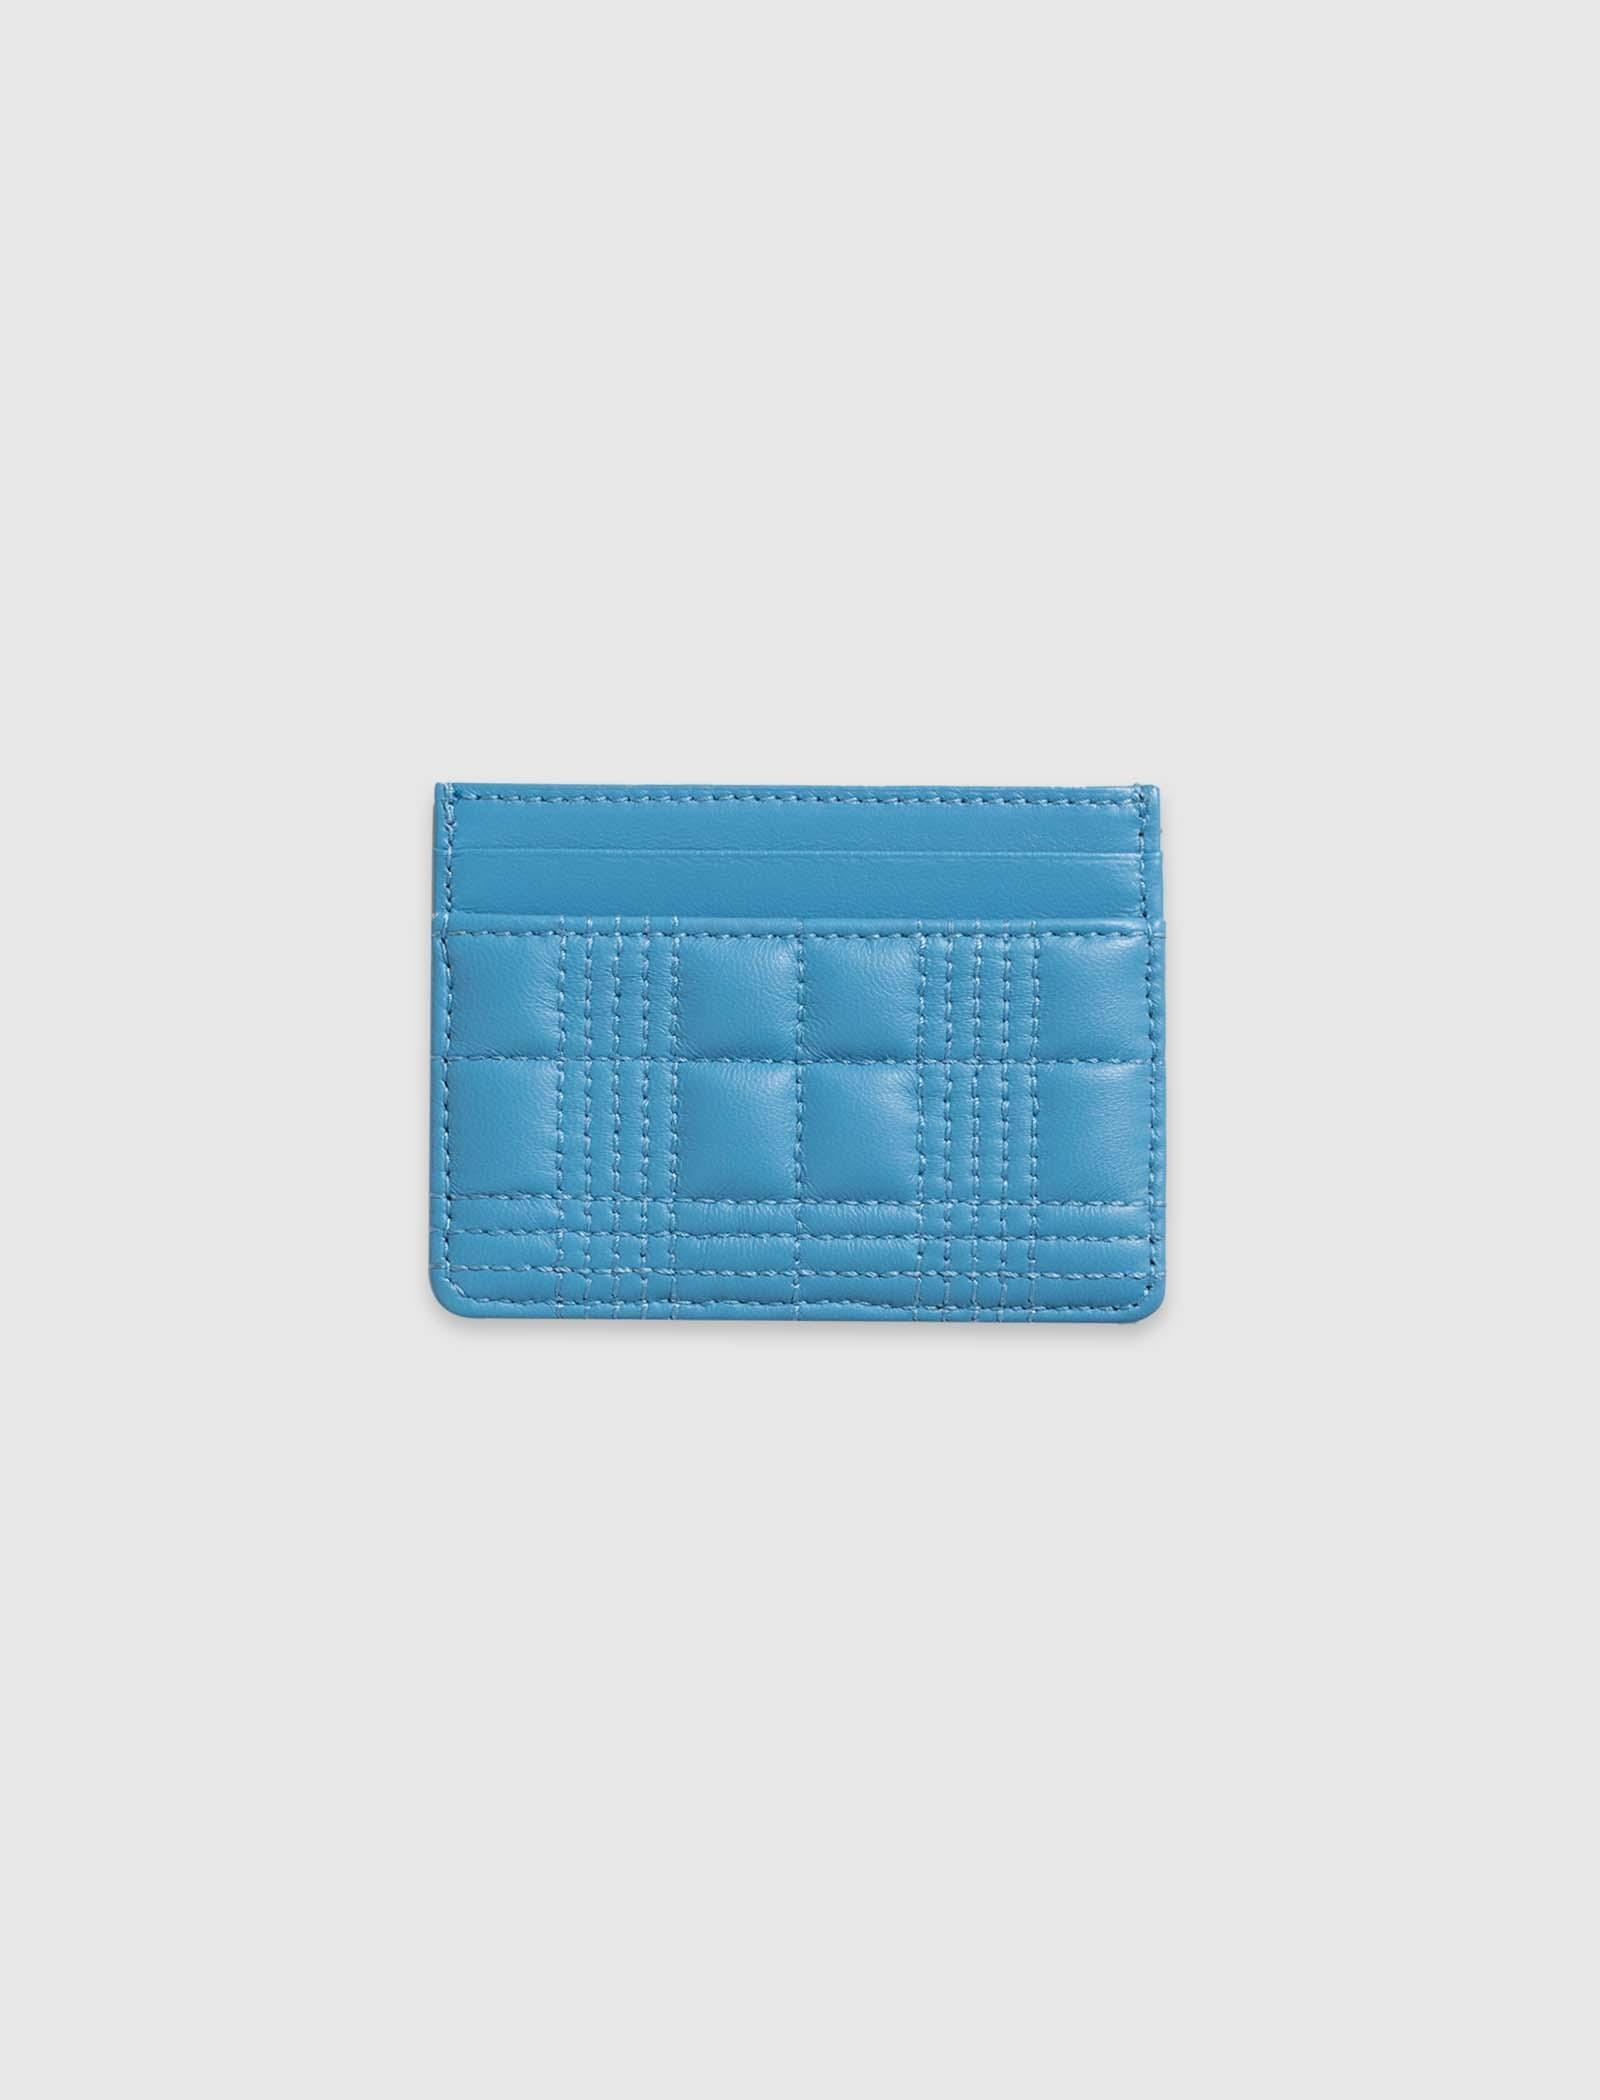 Burberry Card Case in Blue for Men